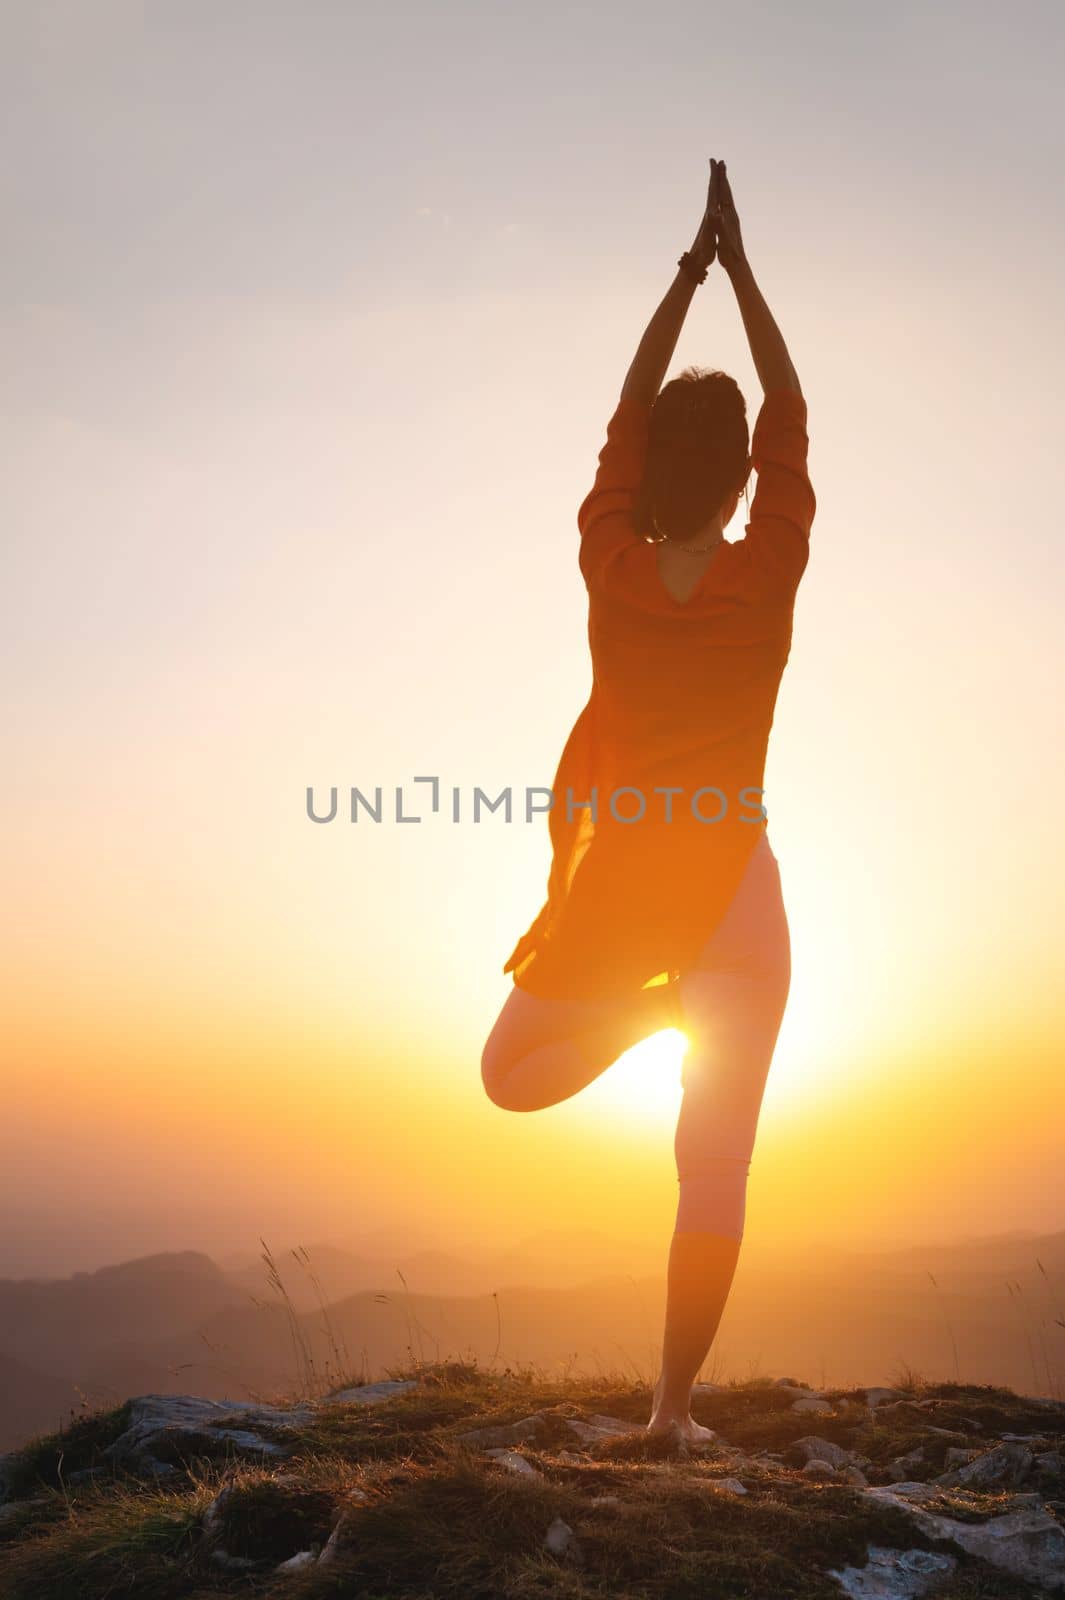 a woman stands in a yoga pose against the sun in the mountains, a silhouette of a sporty woman.